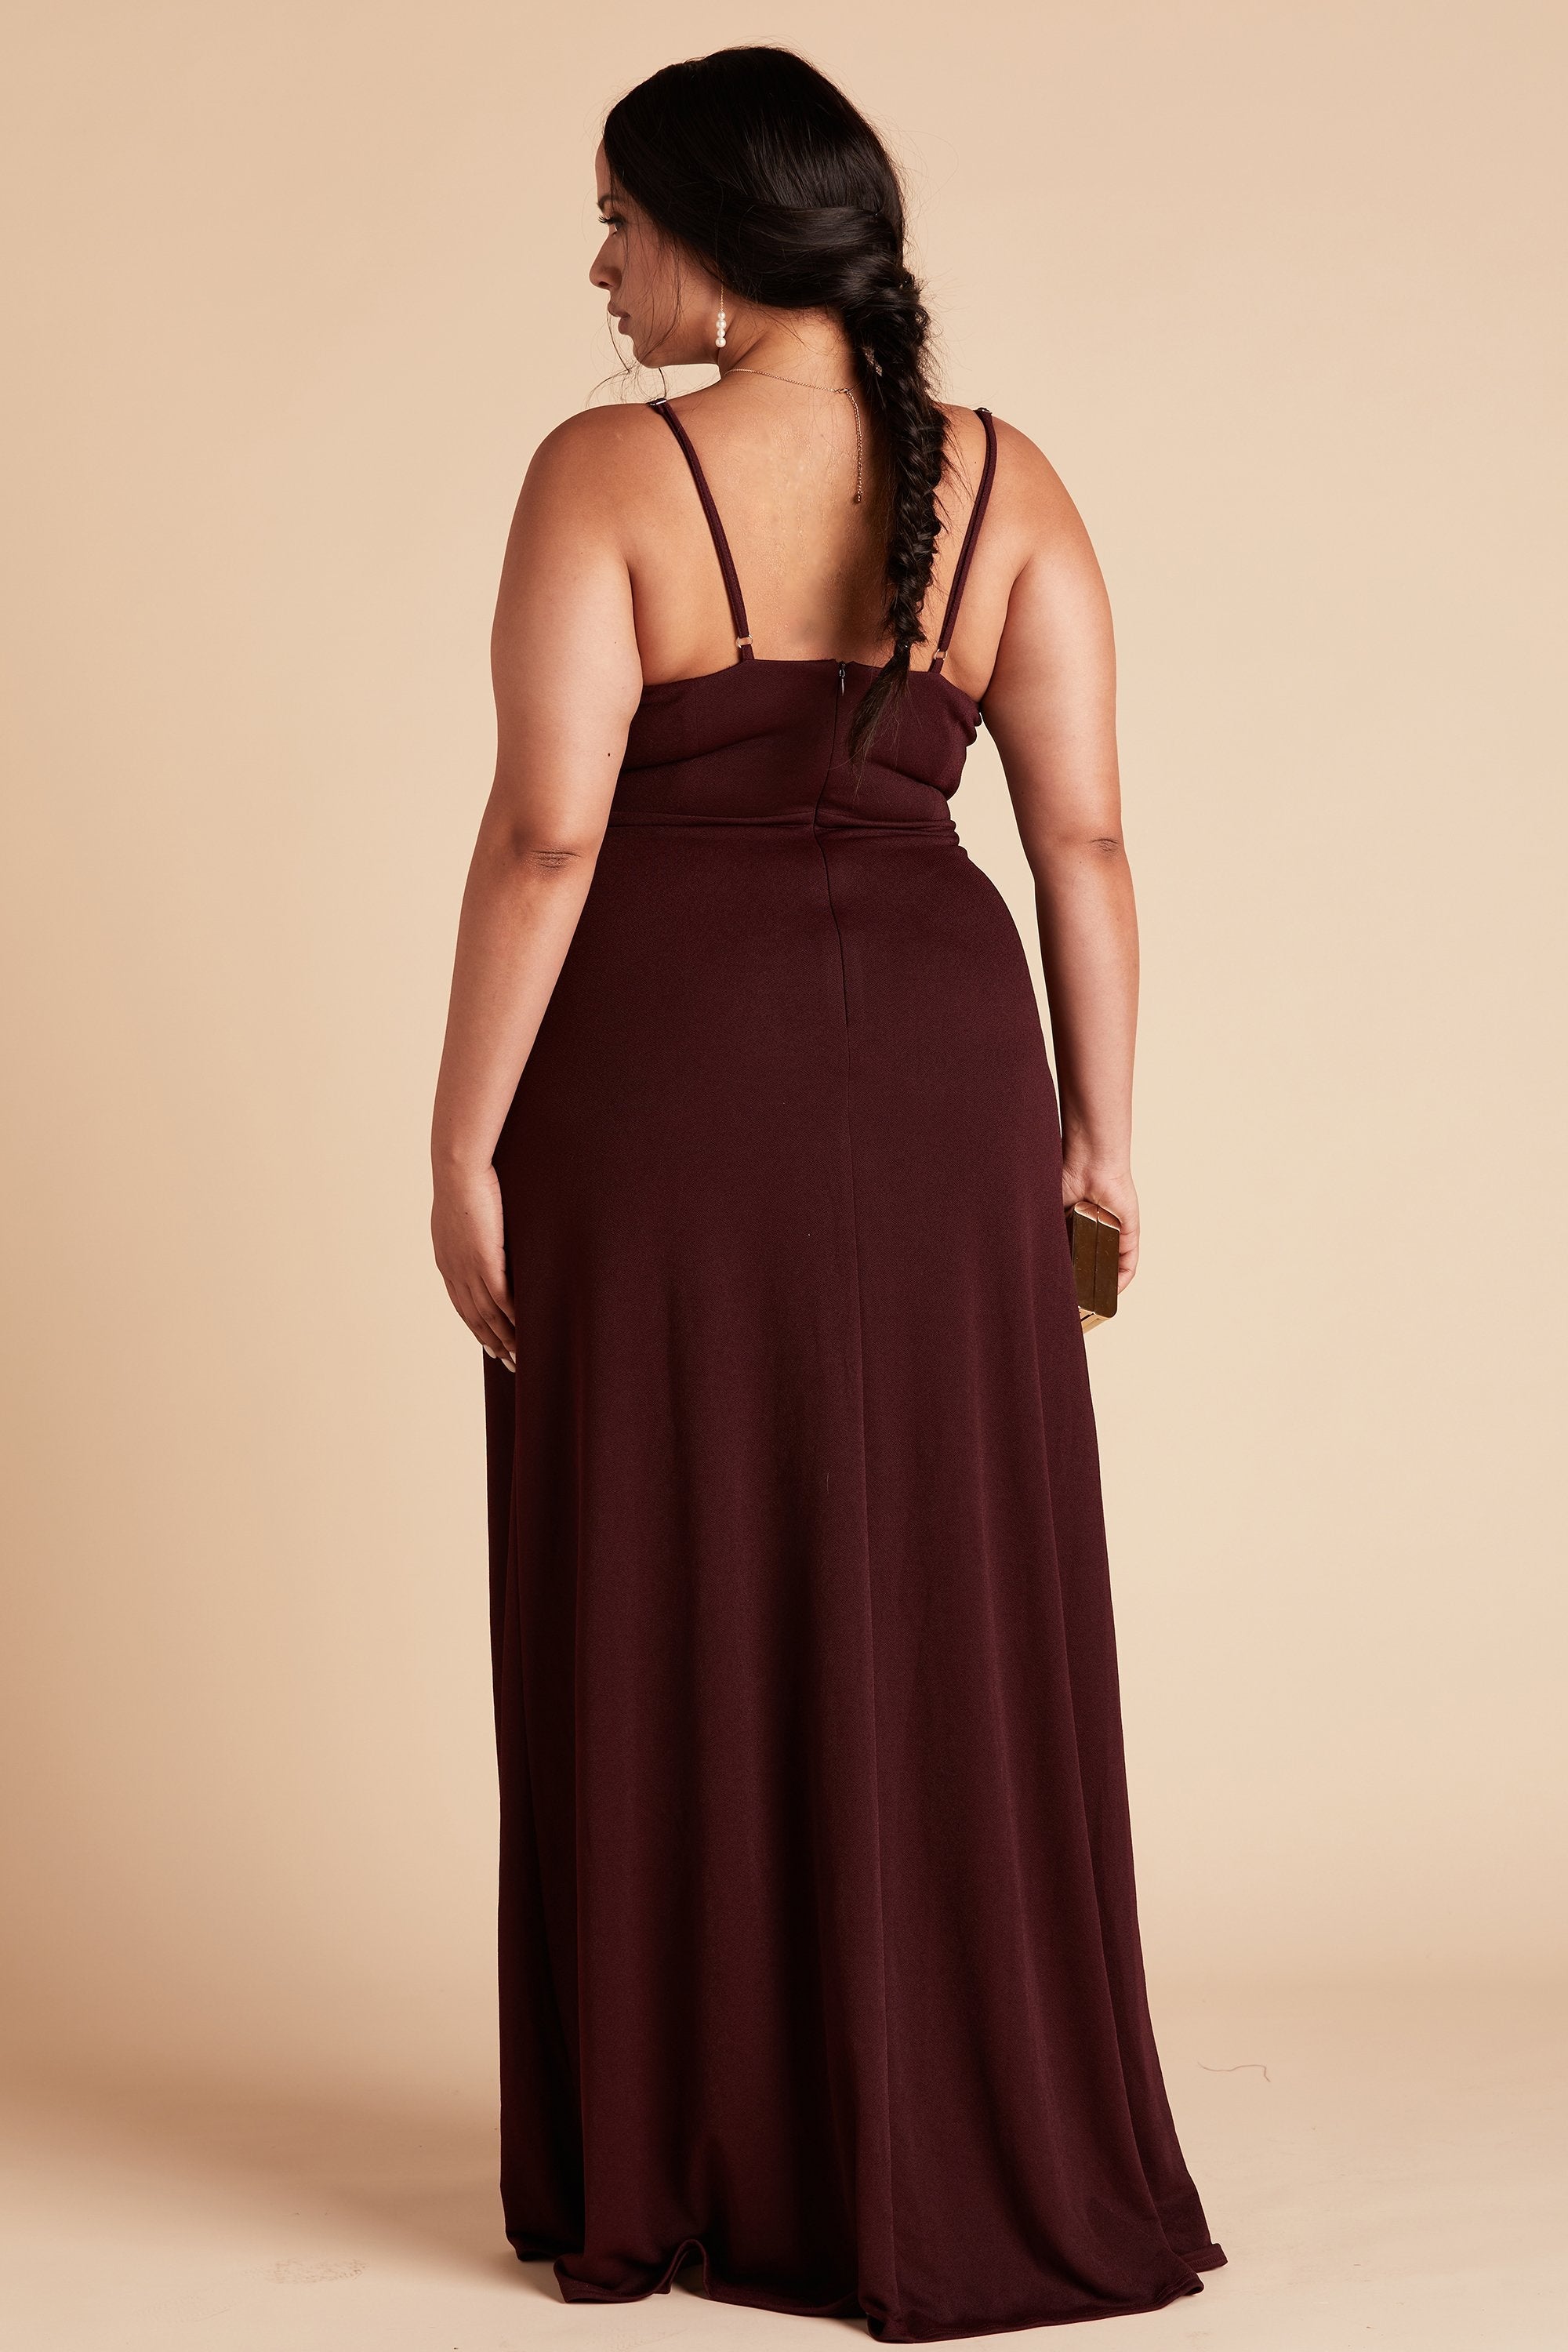 Ash plus size bridesmaid dress in cabernet burgundy crepe by Birdy Grey, back view